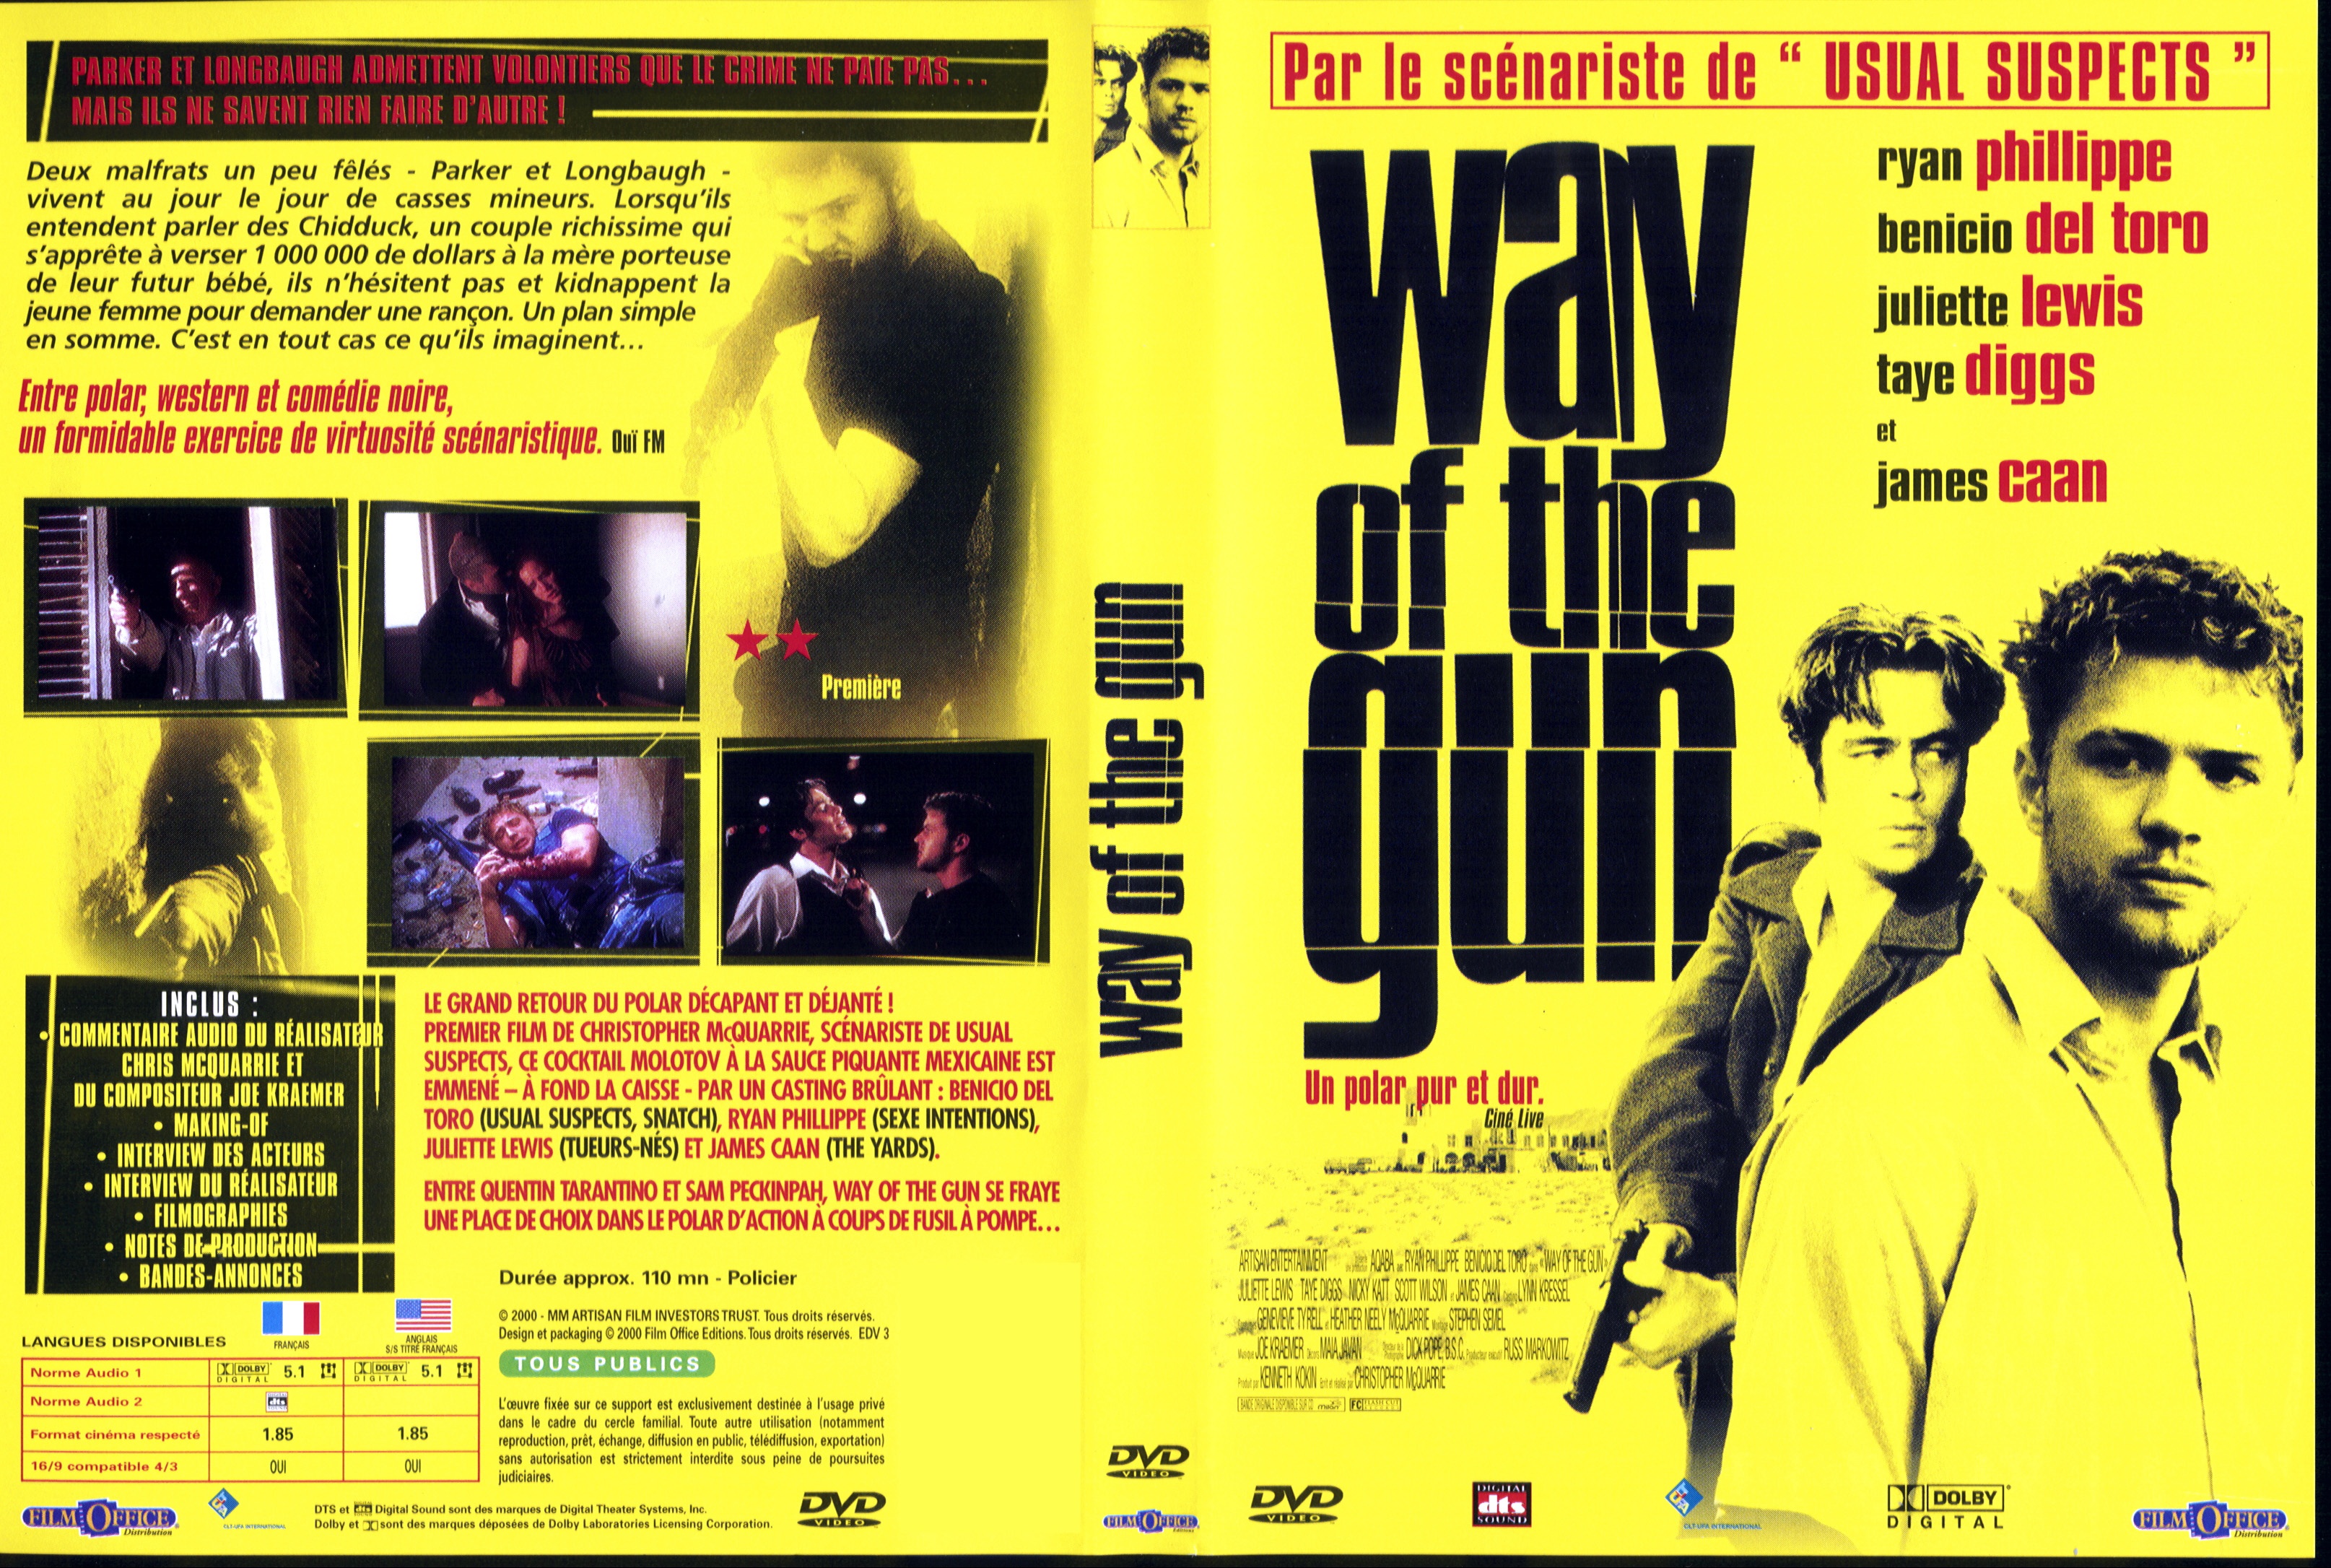 Jaquette DVD Way of the gun v2